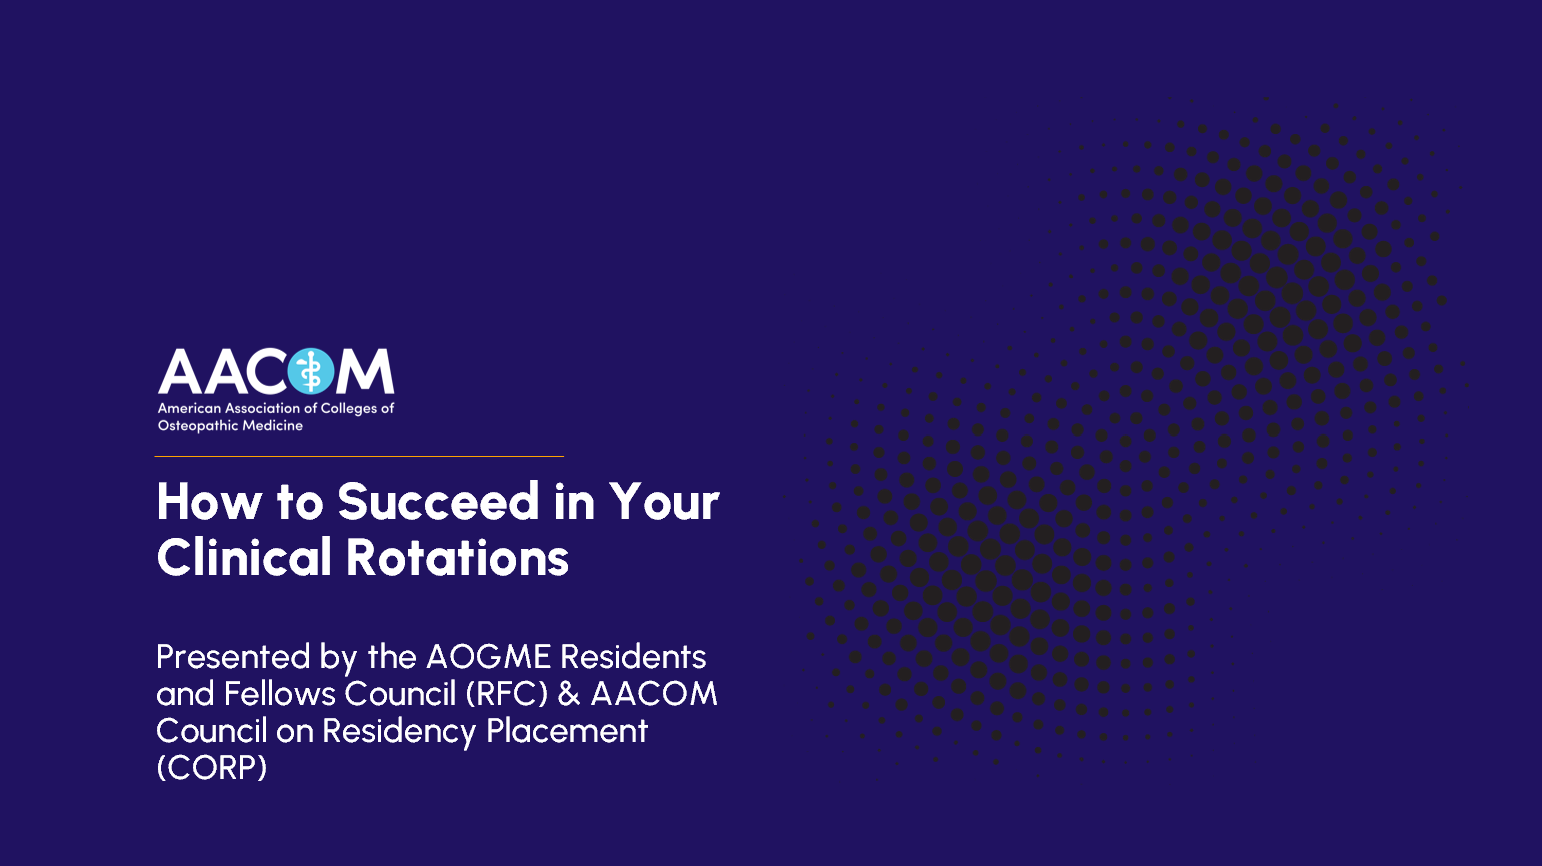 AOGME Residents and Fellows Council Webinar on How to Succeed in Your Clinical Rotations